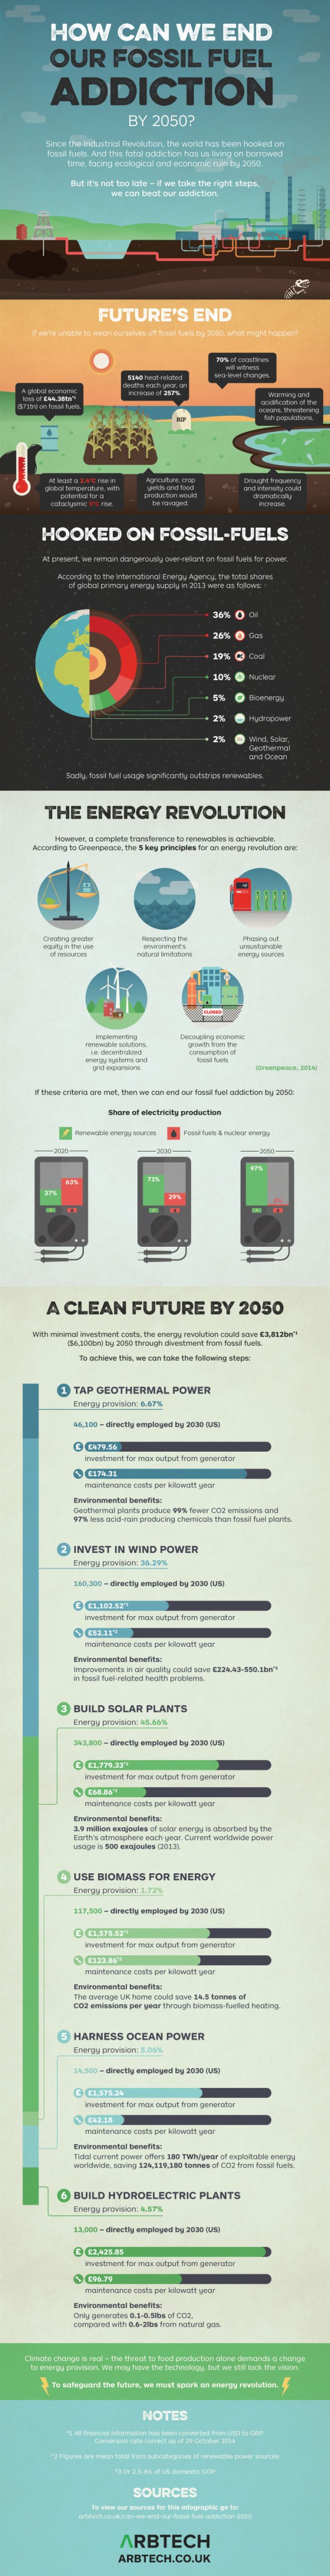 How can we end our fossil fuel addiction by 2050